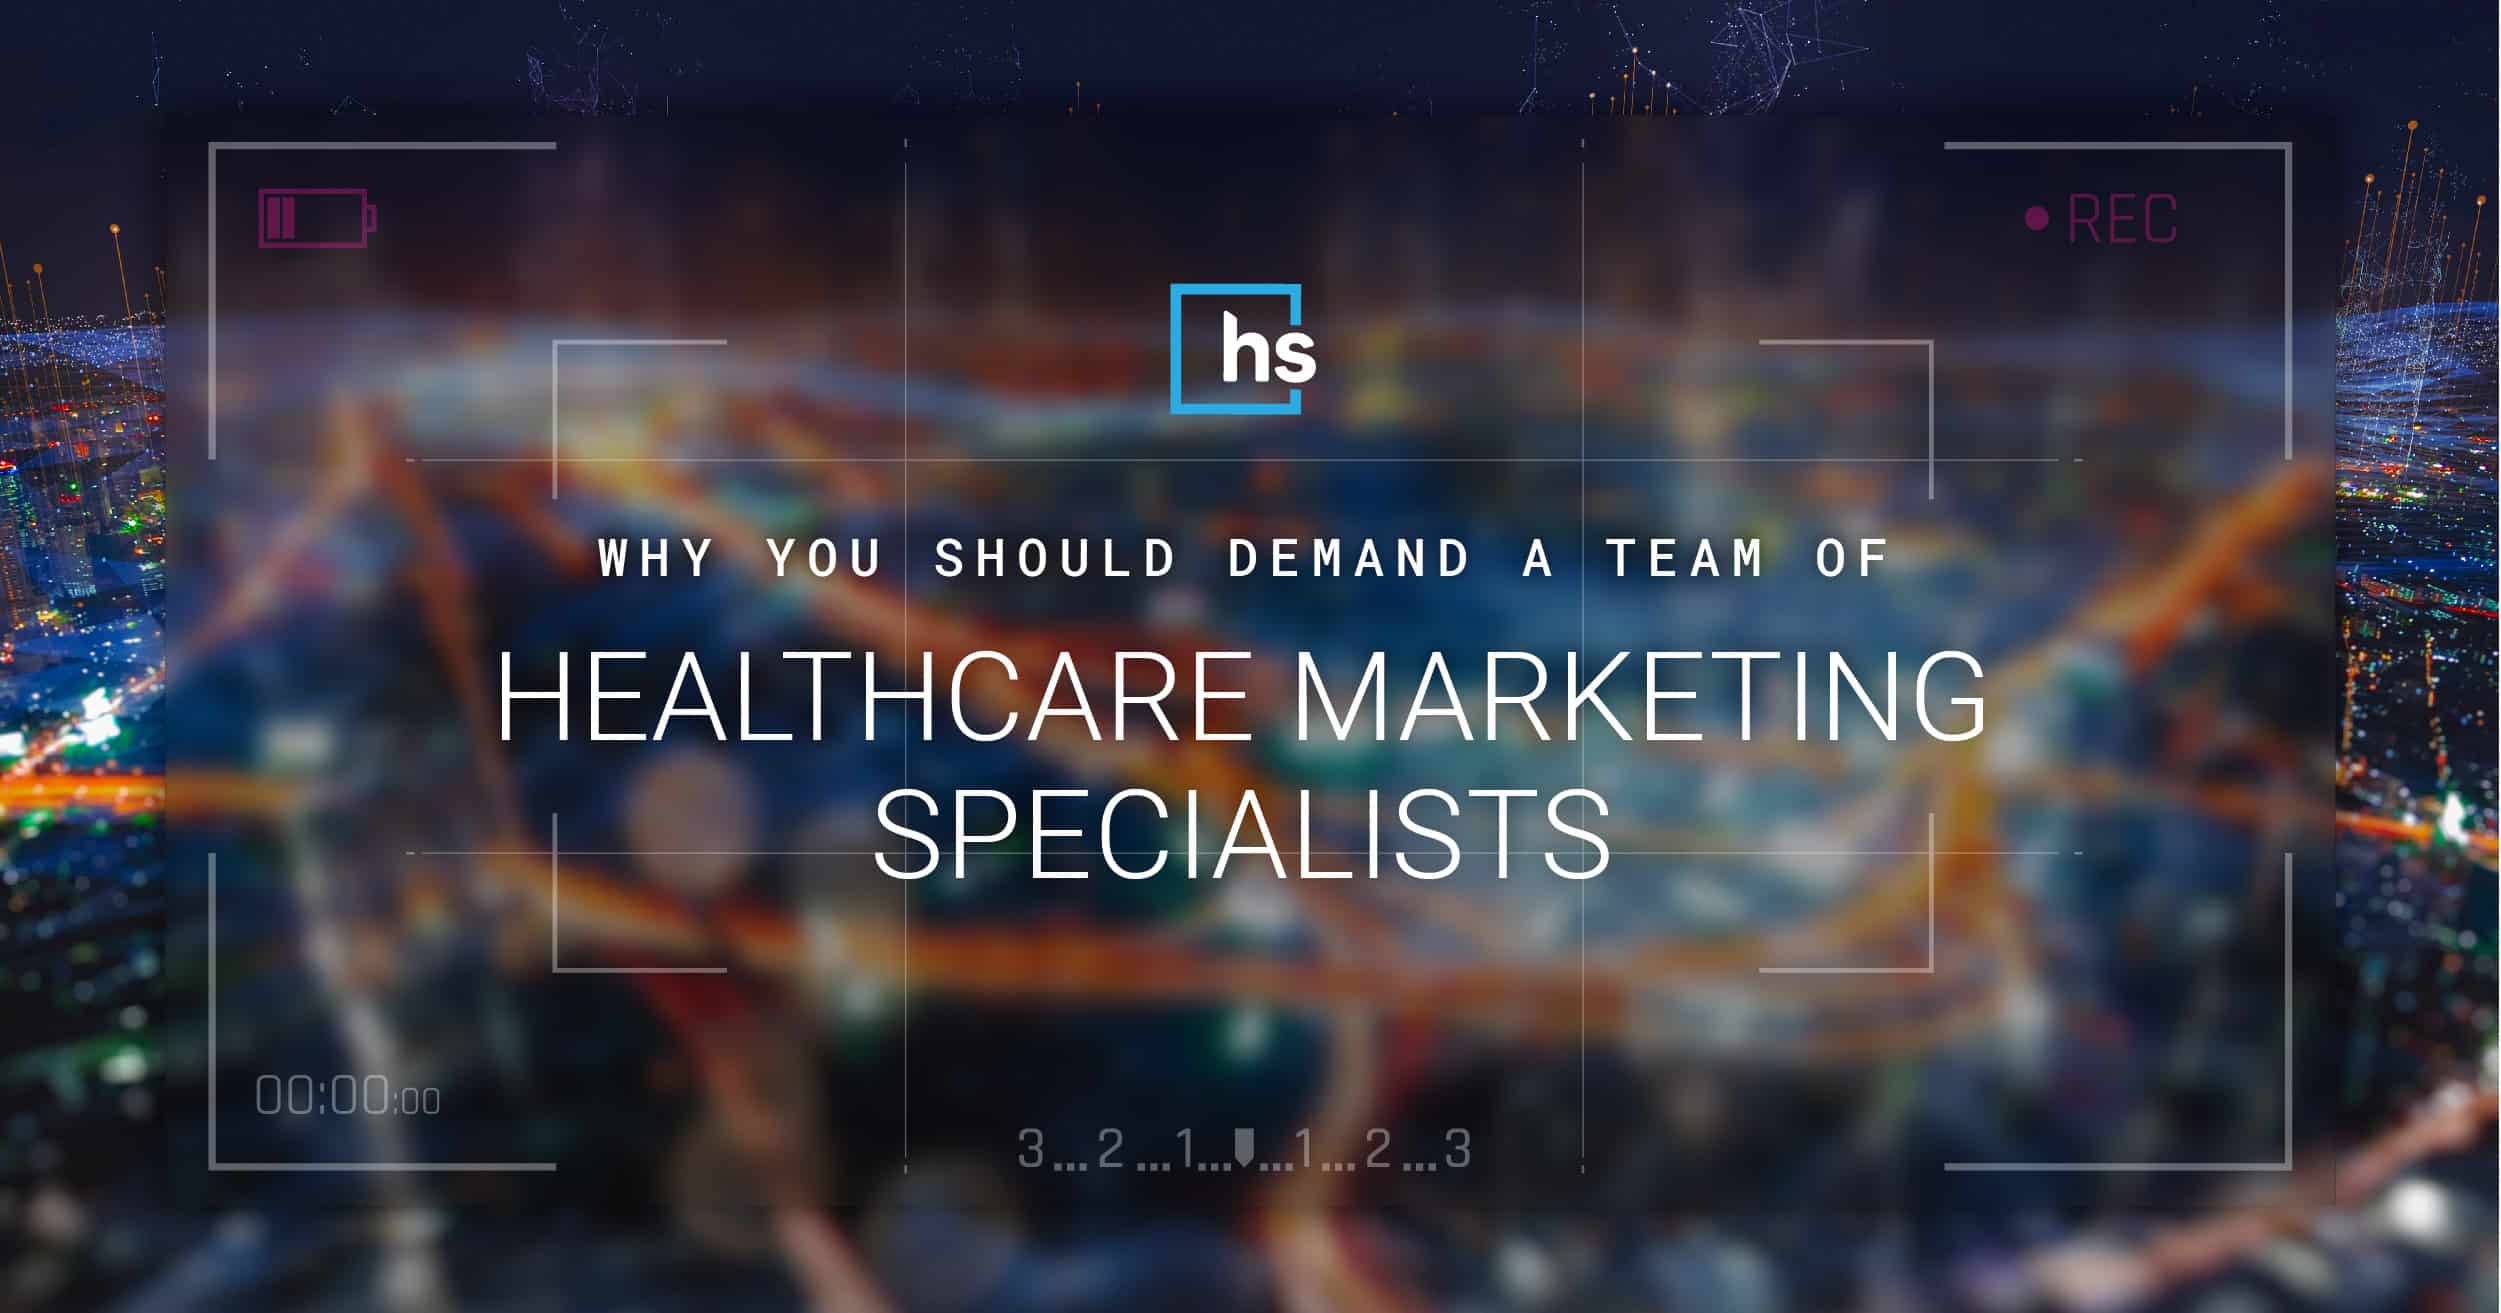 Why You Should Demand a Team of Healthcare Marketing Specialists